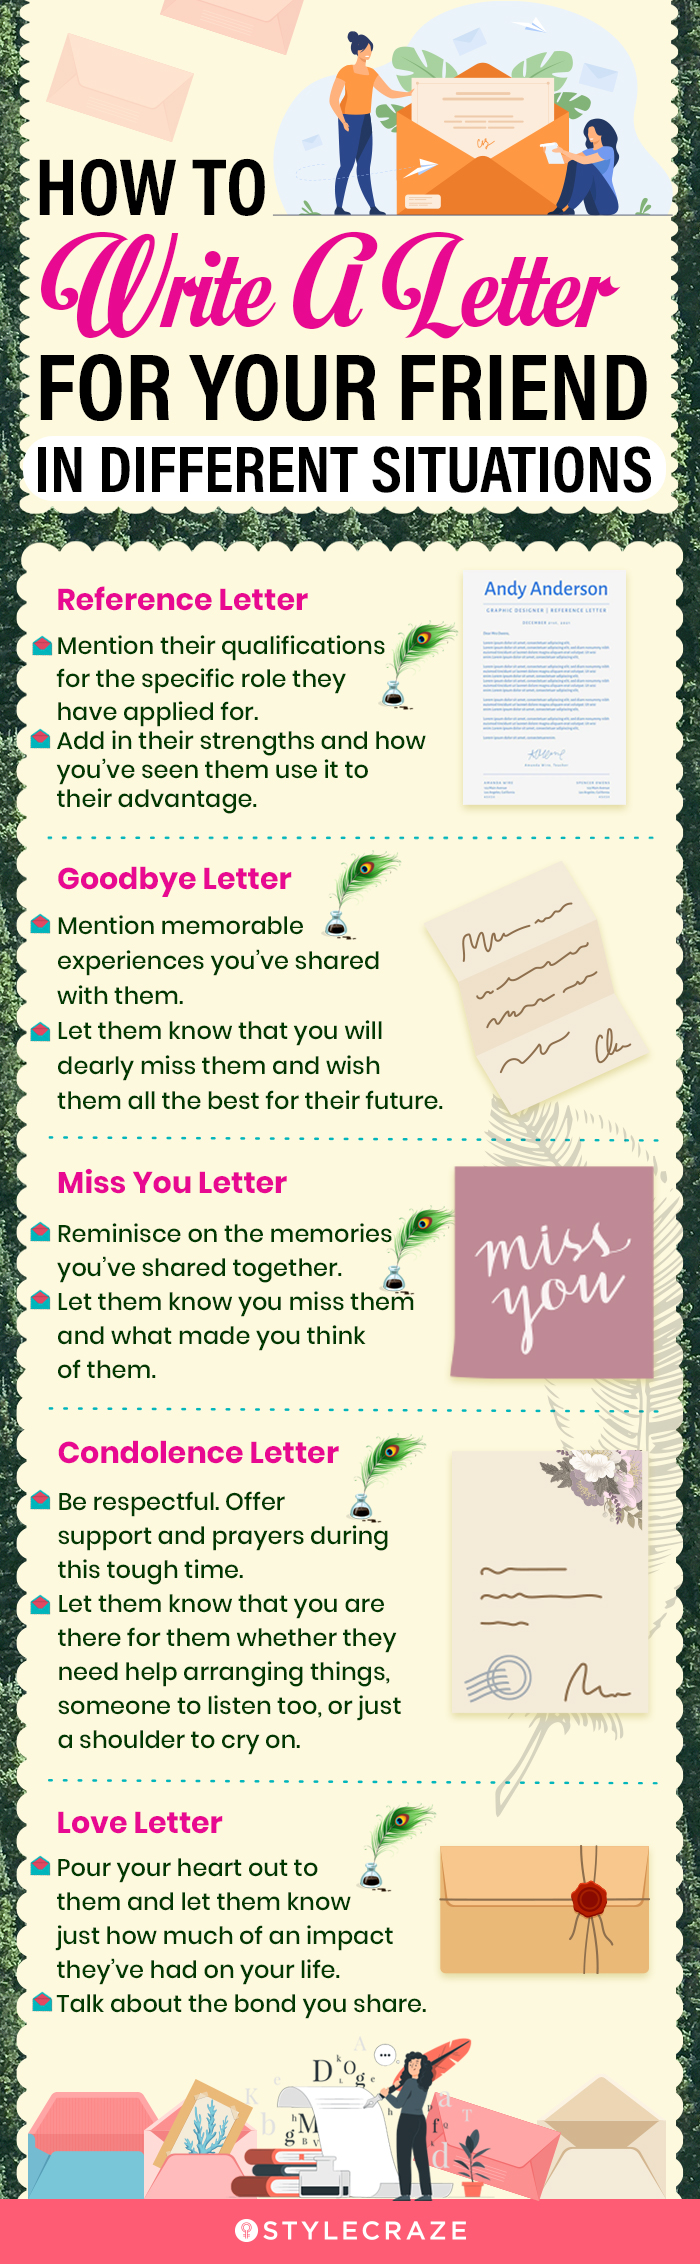 how to write a letter for your friend in different situations [infographic]